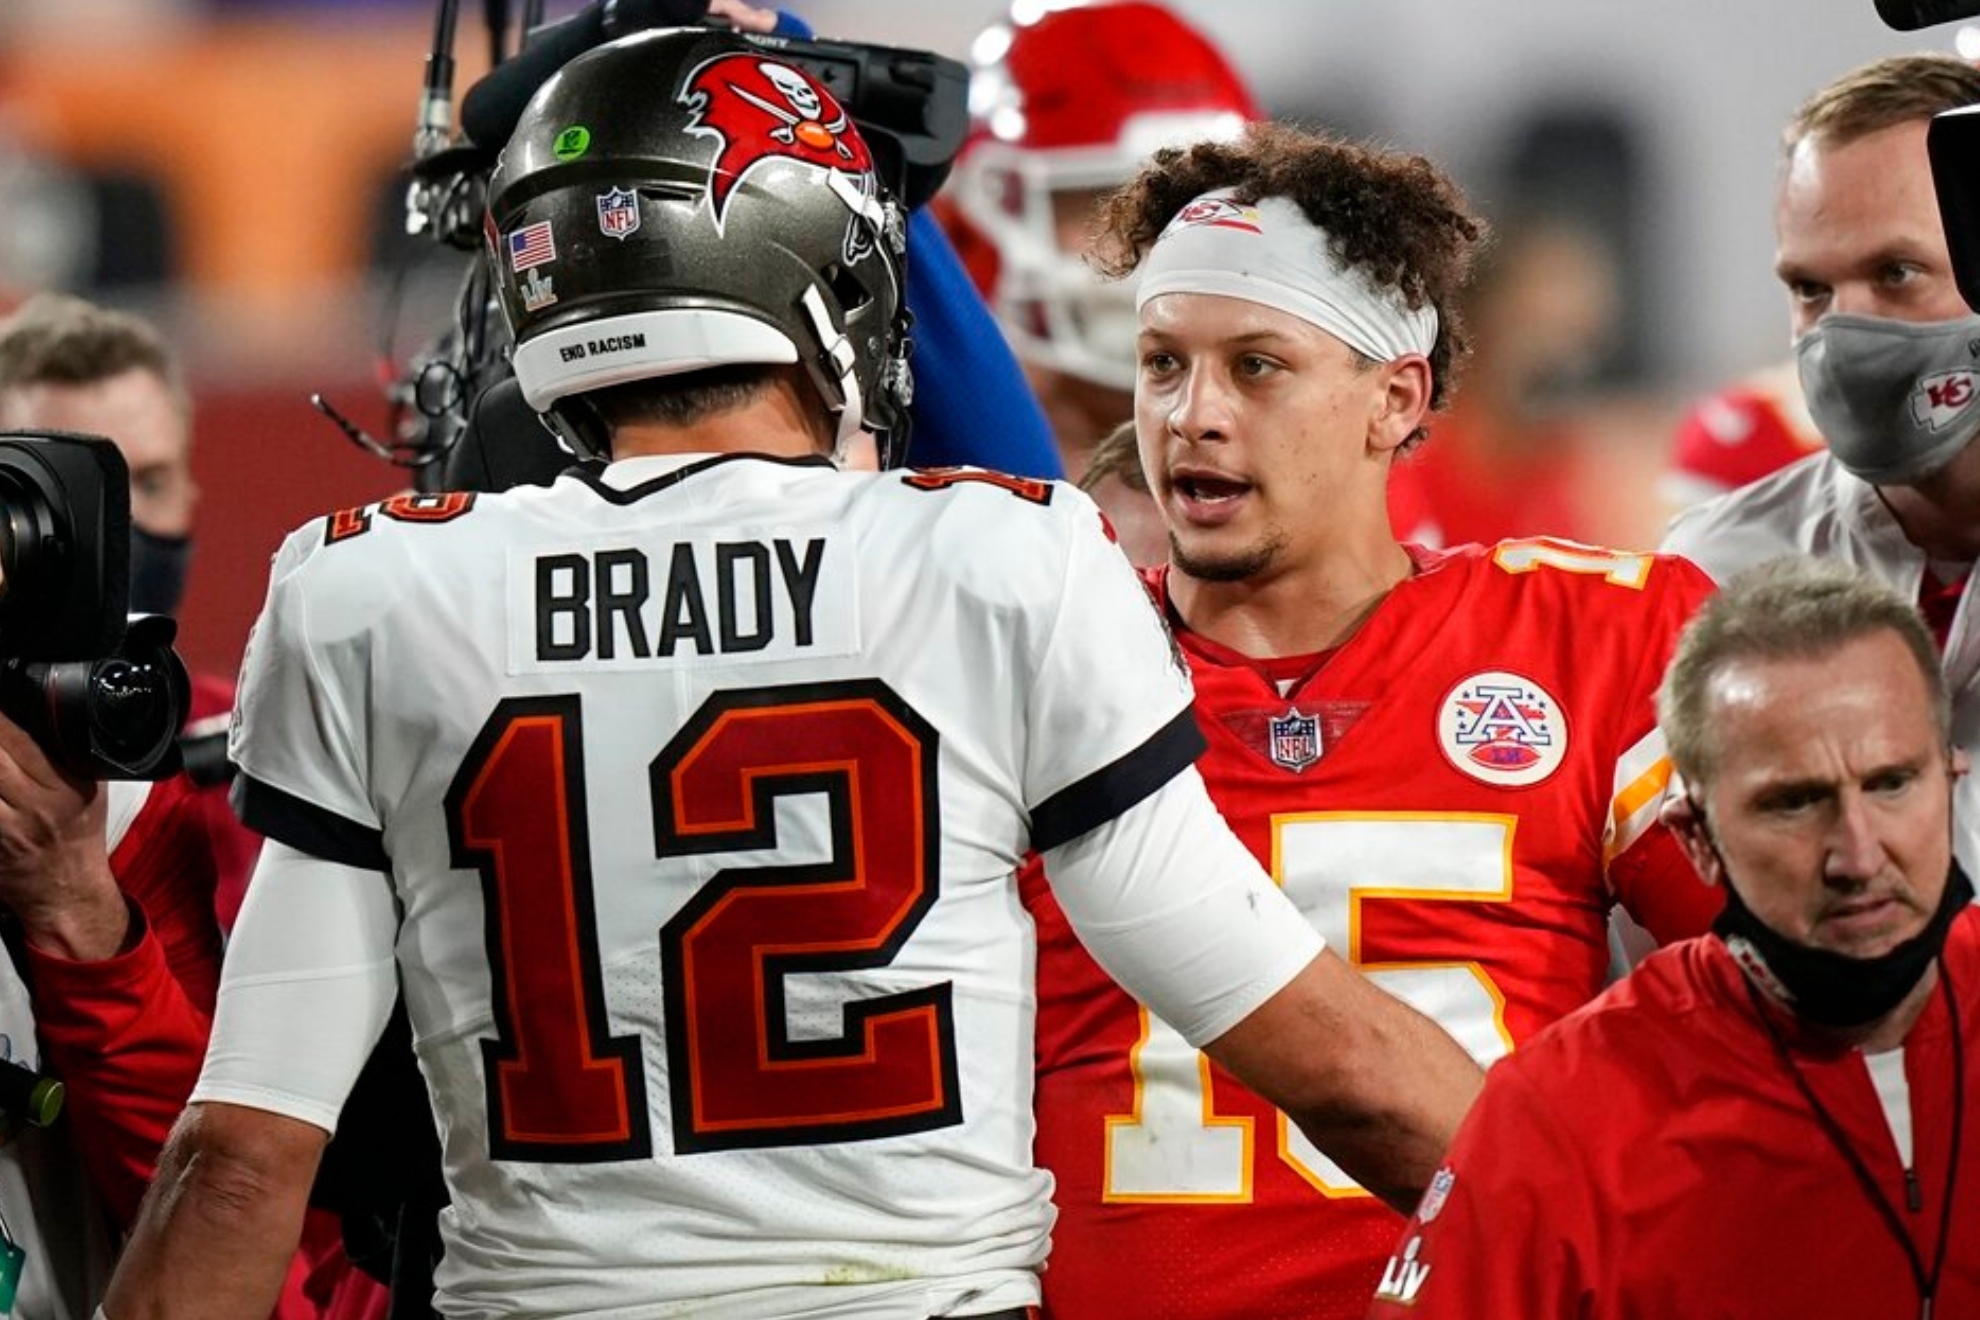 Patrick Mahomes and Tom Brady's connection goes beyond football